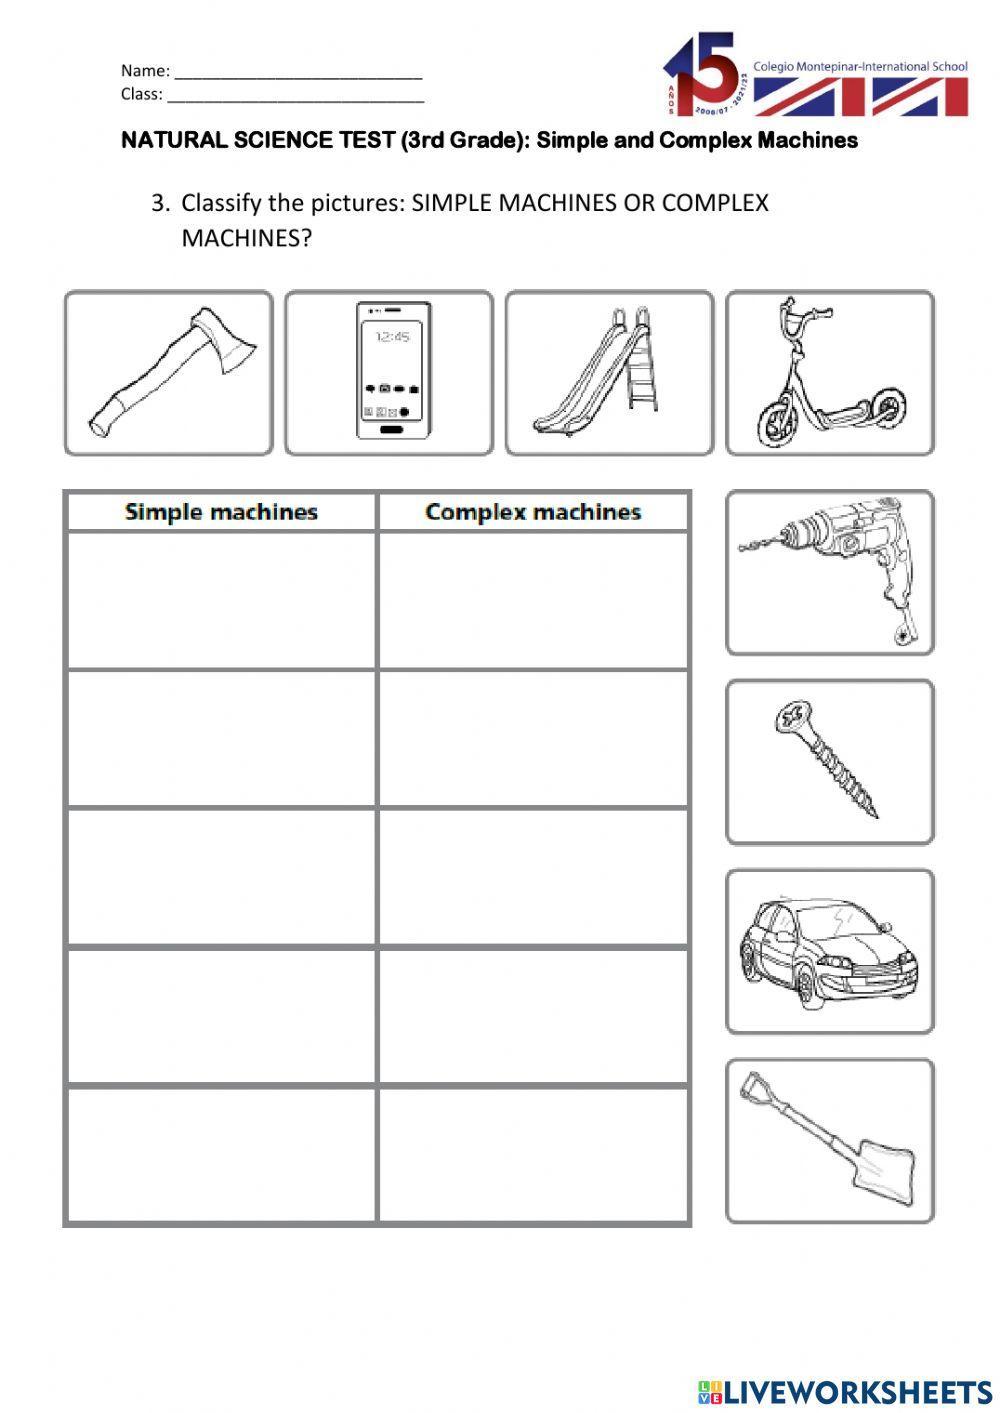 Natural Science test Grade 3: Simple and Complex machines